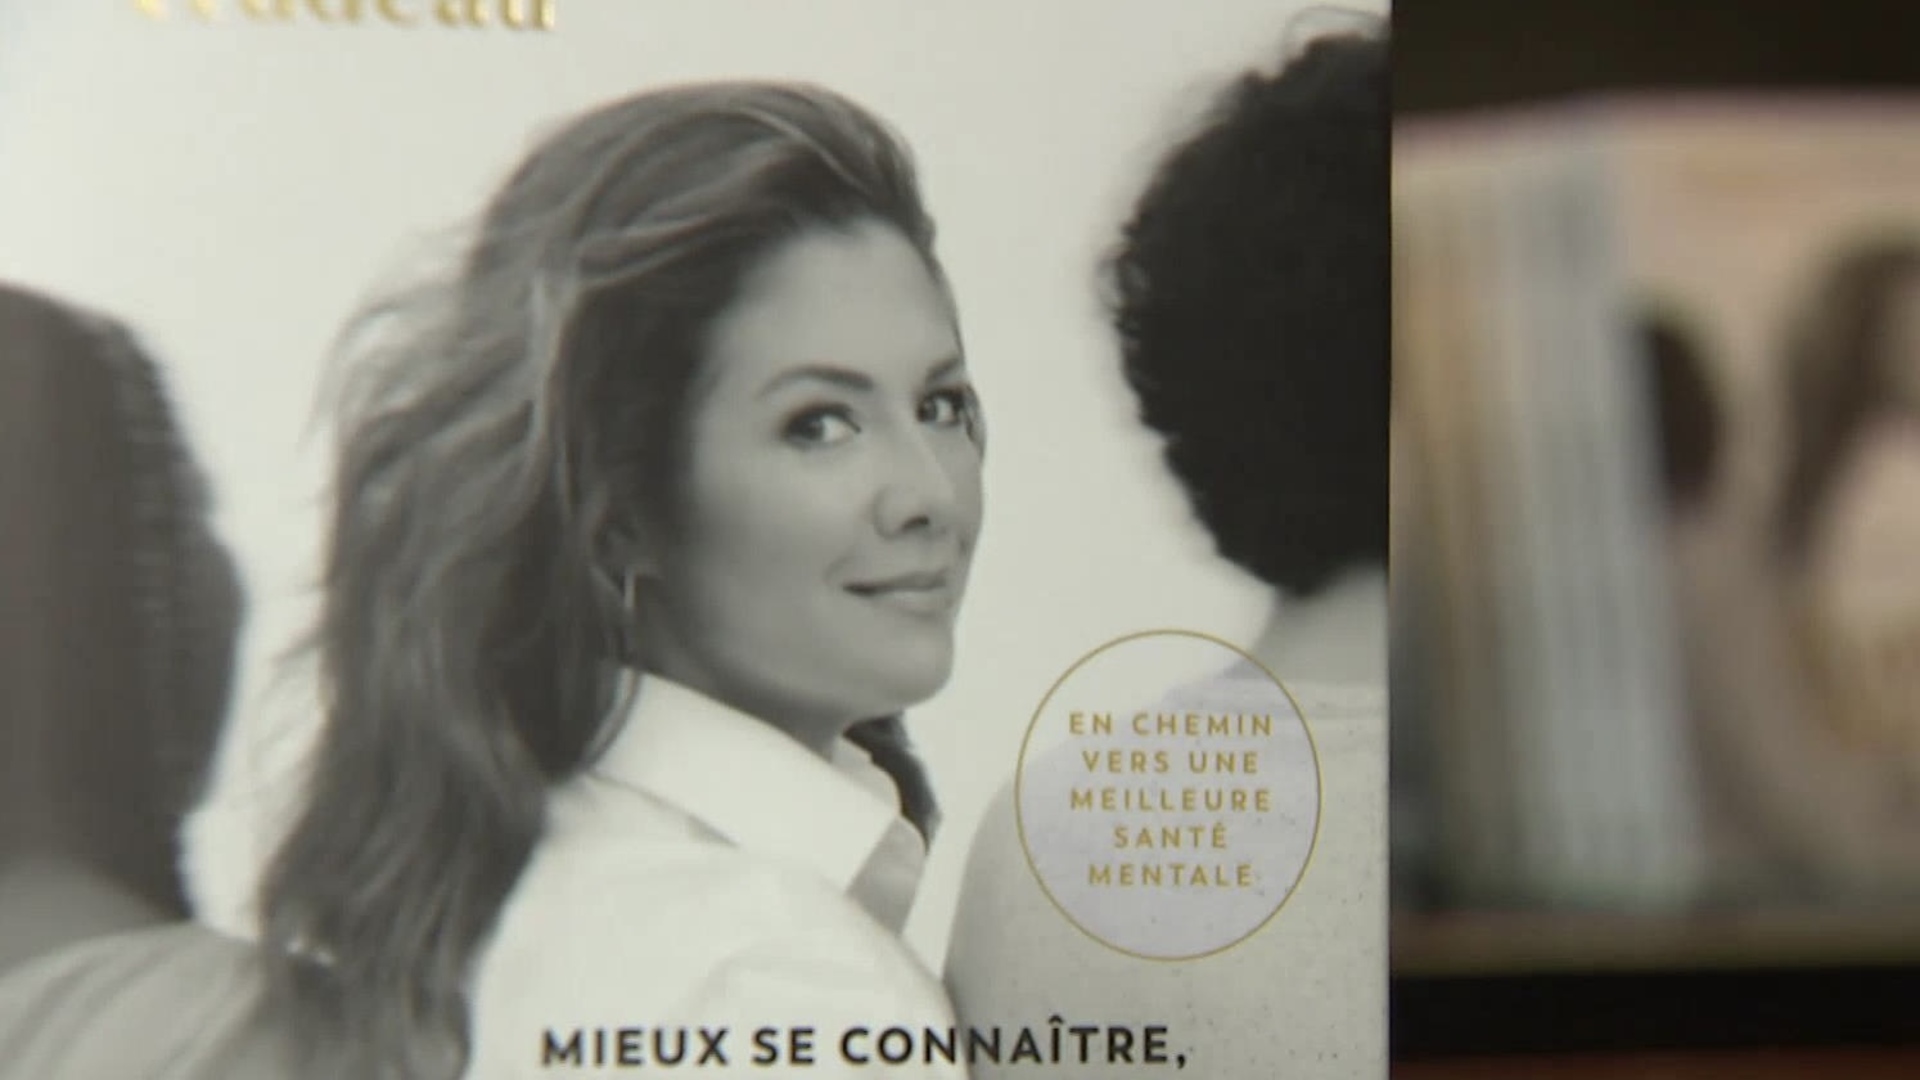 Sophie Grégoire Trudeau brings all 'Closer Together' with first book